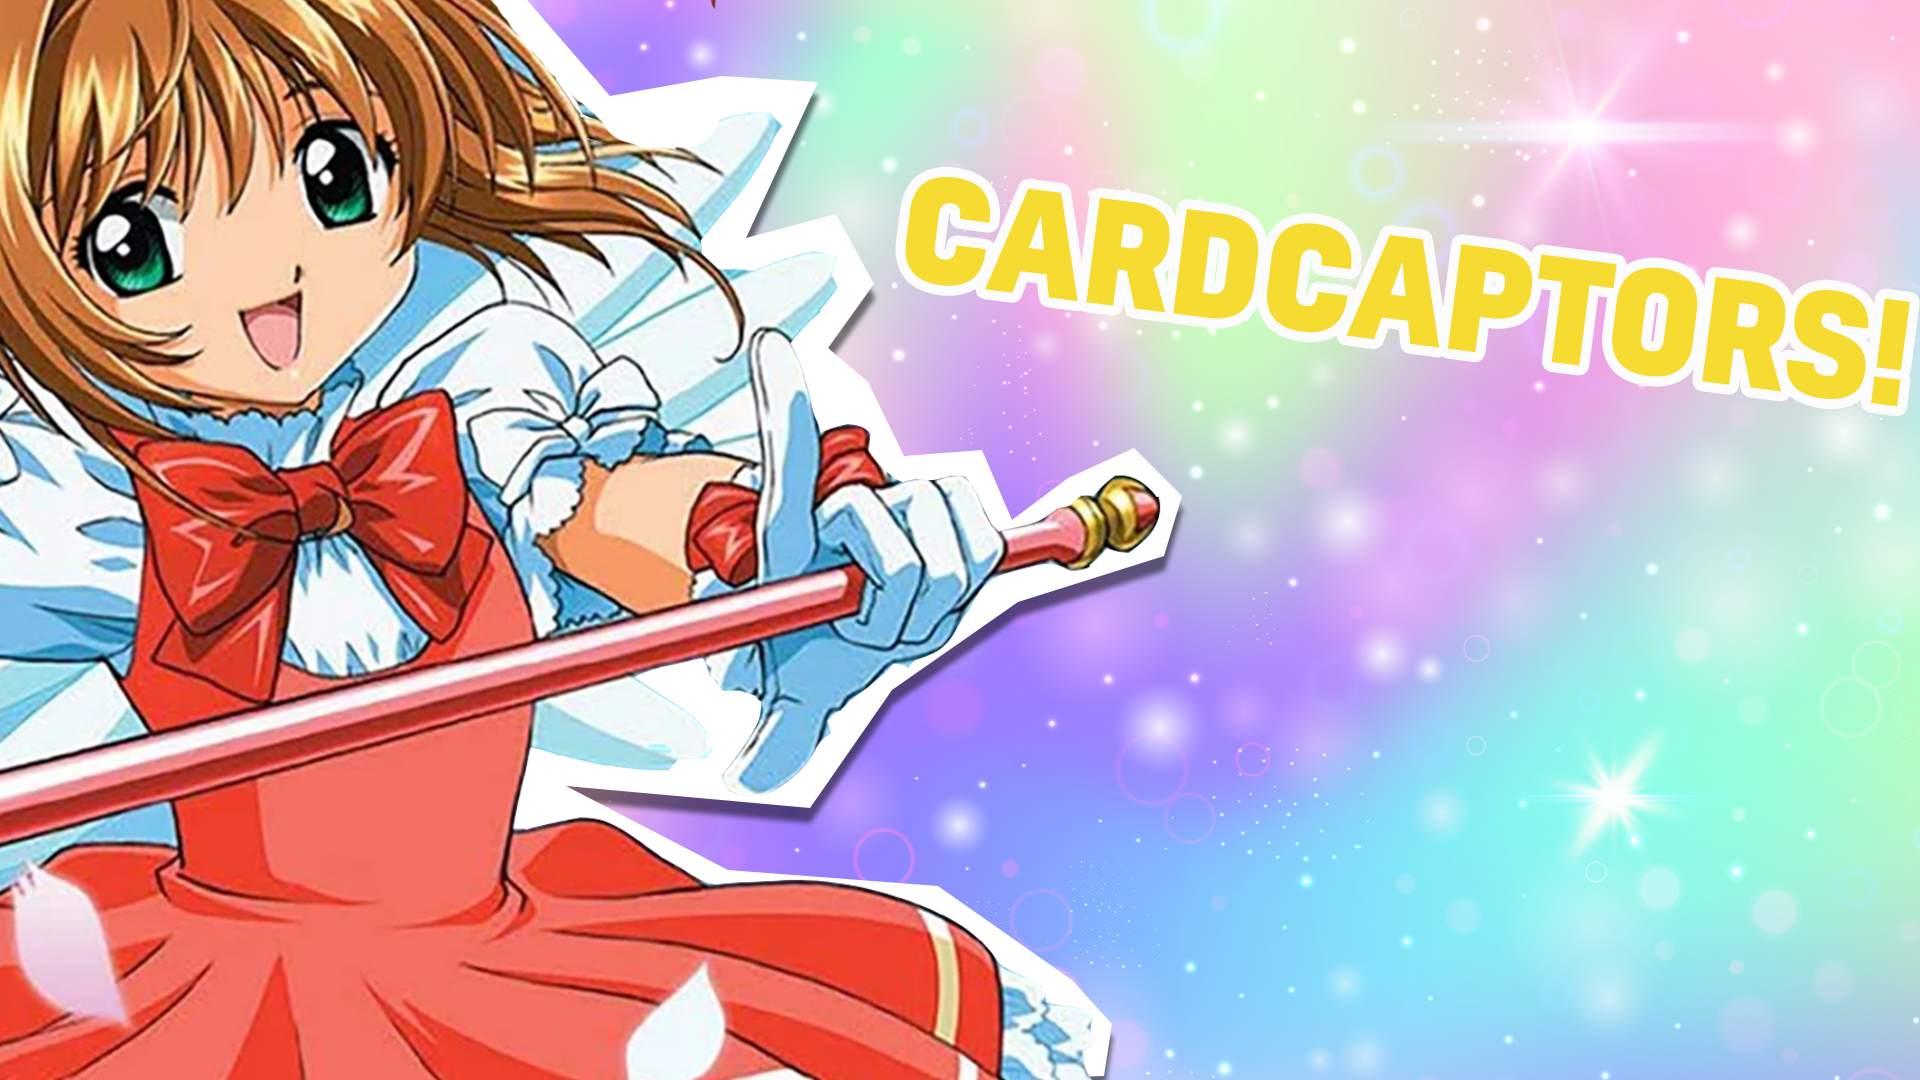 Cardcaptors of the Clow, expect the unexpected now! You should definitely check out Cardcaptors! If you love Pokémon and collecting cool objects, you'll love following Sakura on her adventures to collect a magical deck of cards and the creatures they contain!